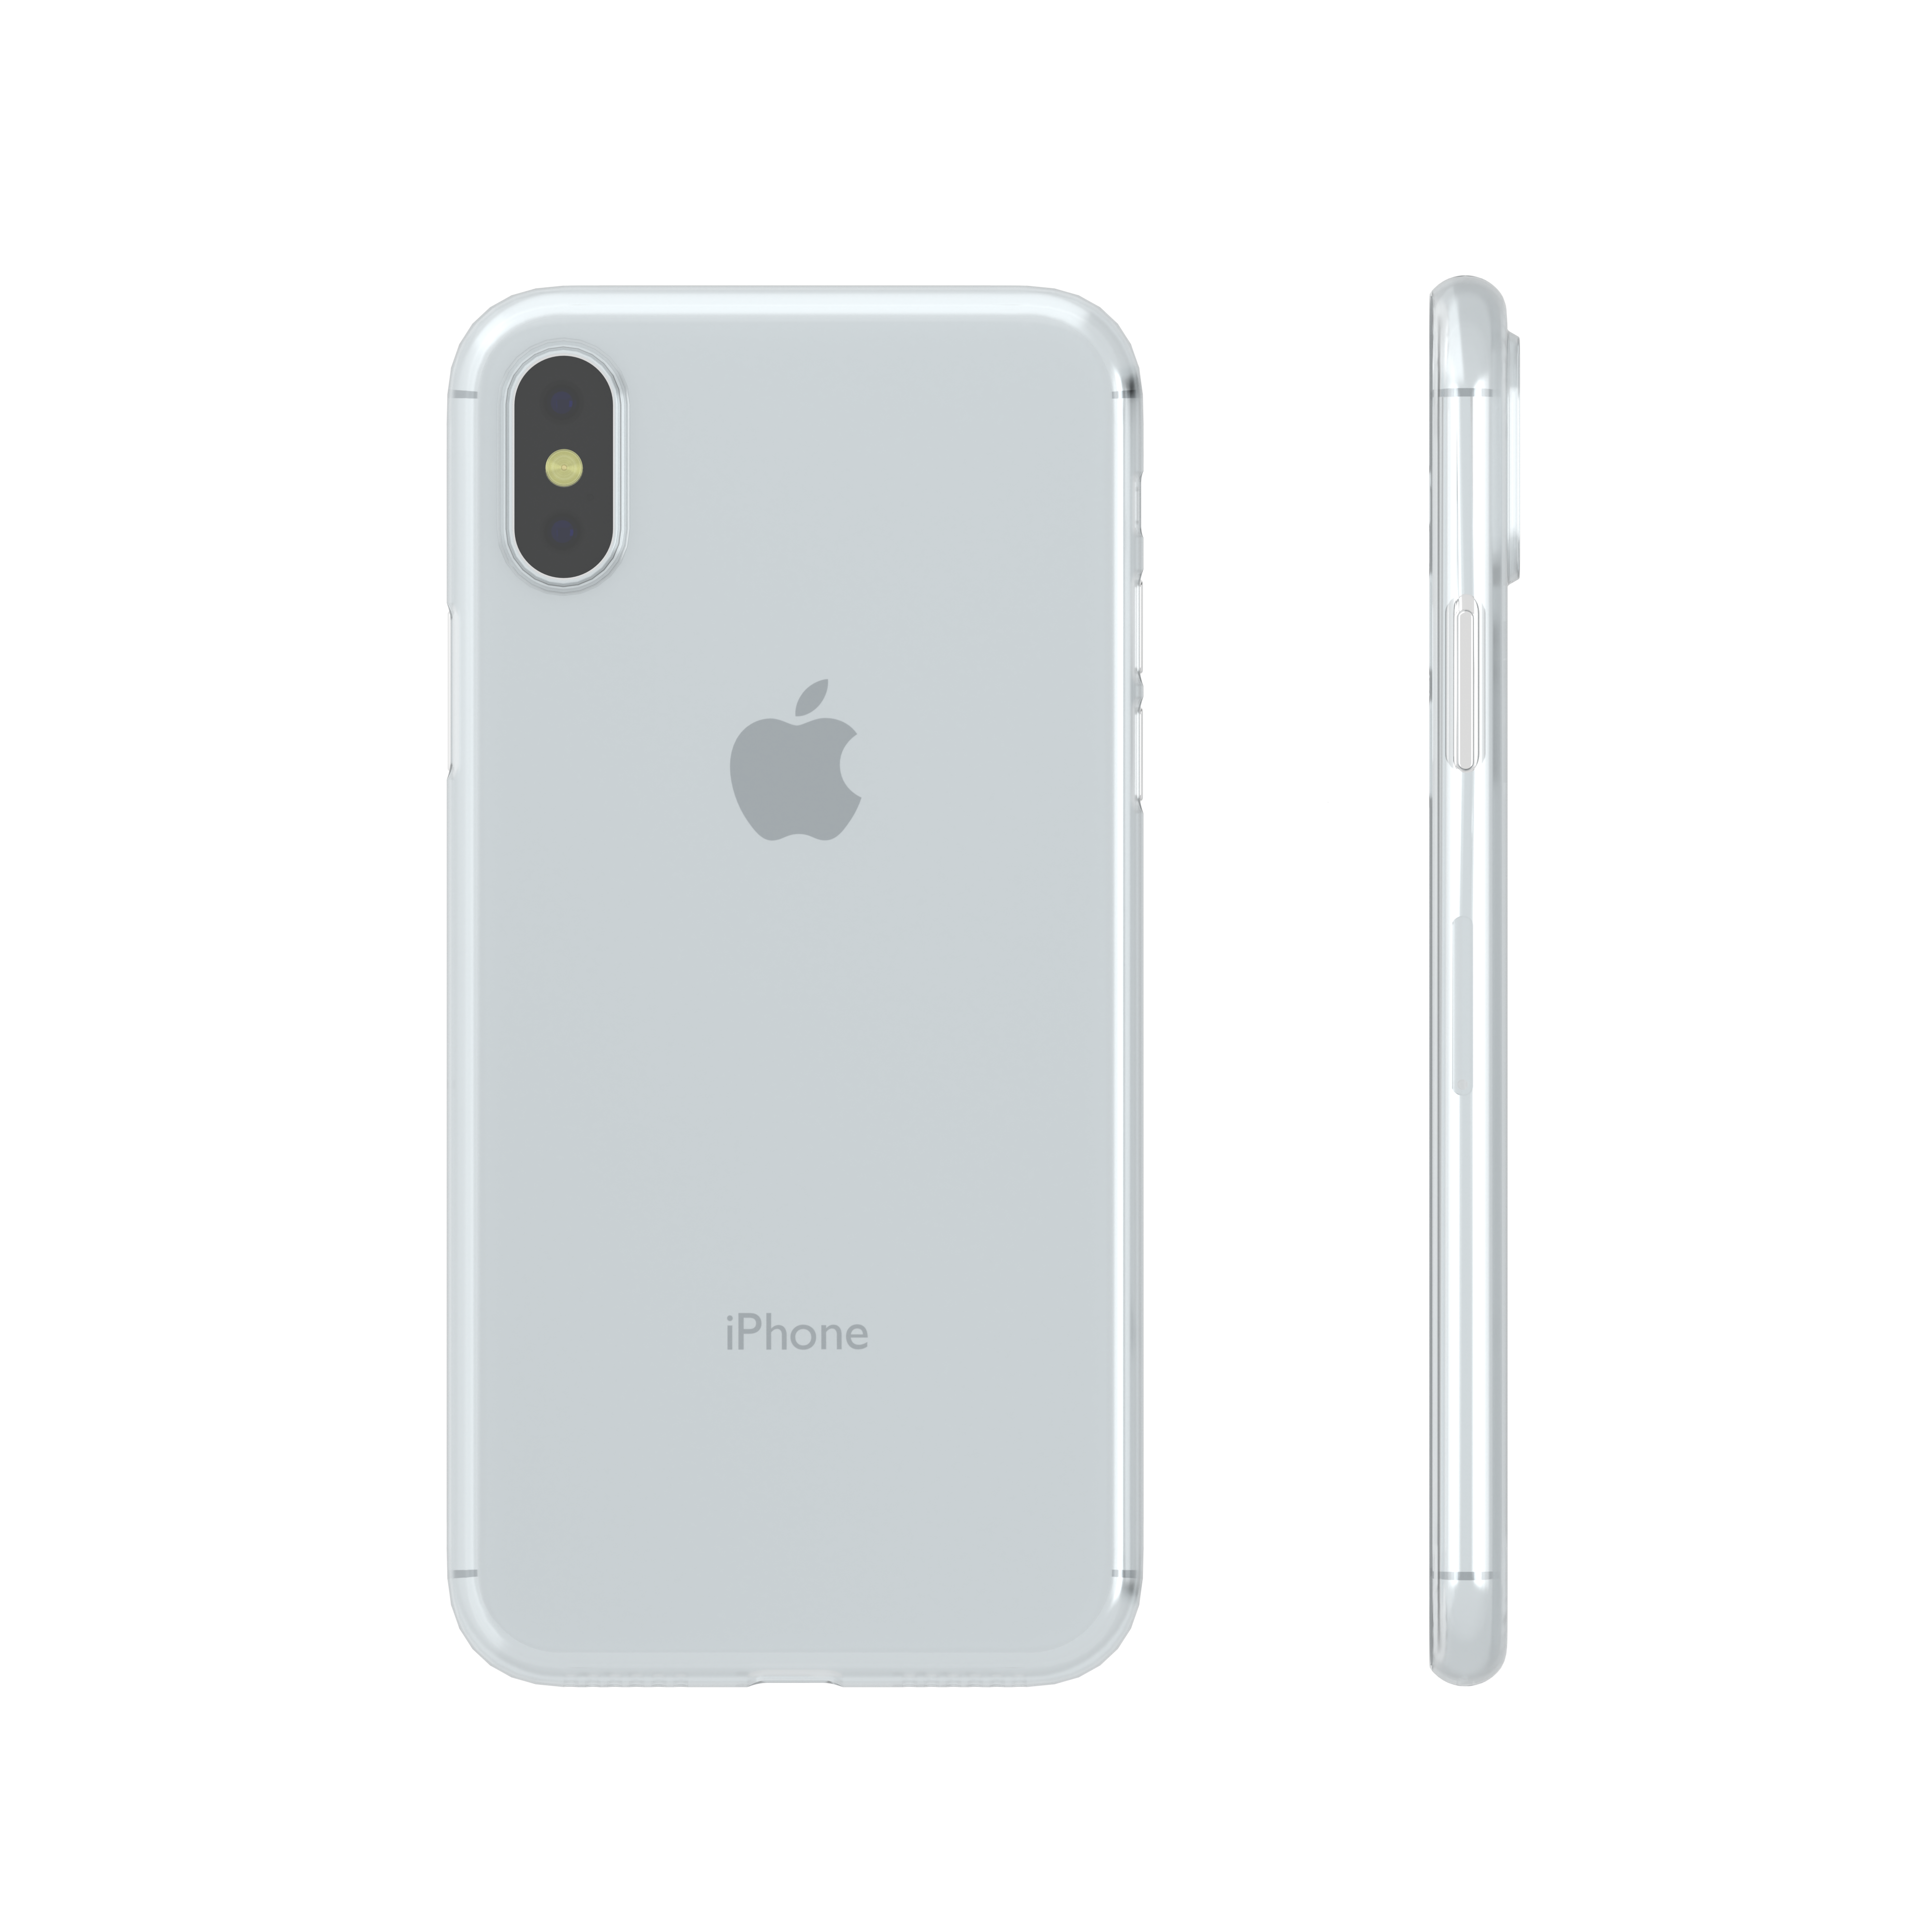 Slimcase cho iPhone XS